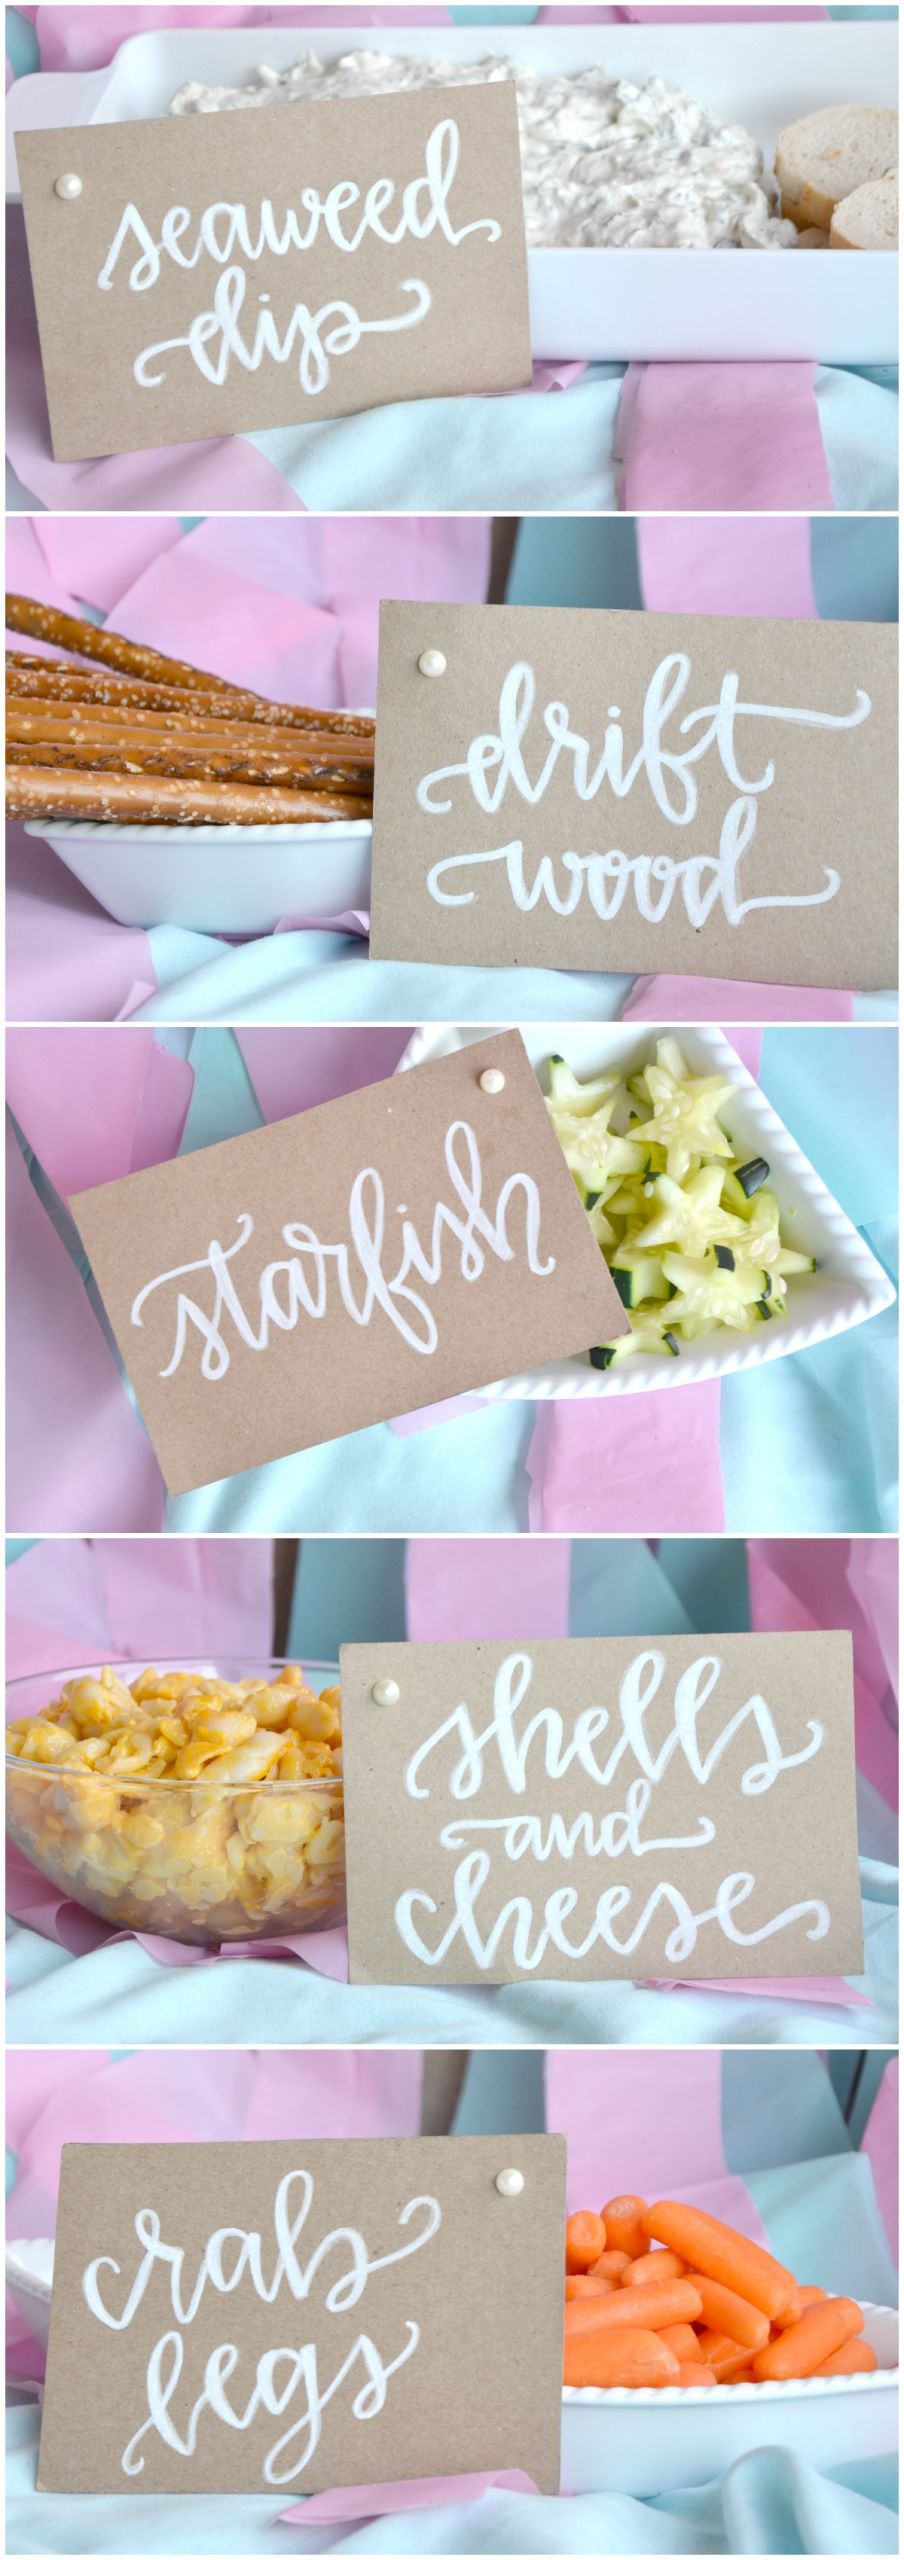 Food Ideas For Mermaid Party
 First Birthday Mermaid Party Brie Brie Blooms